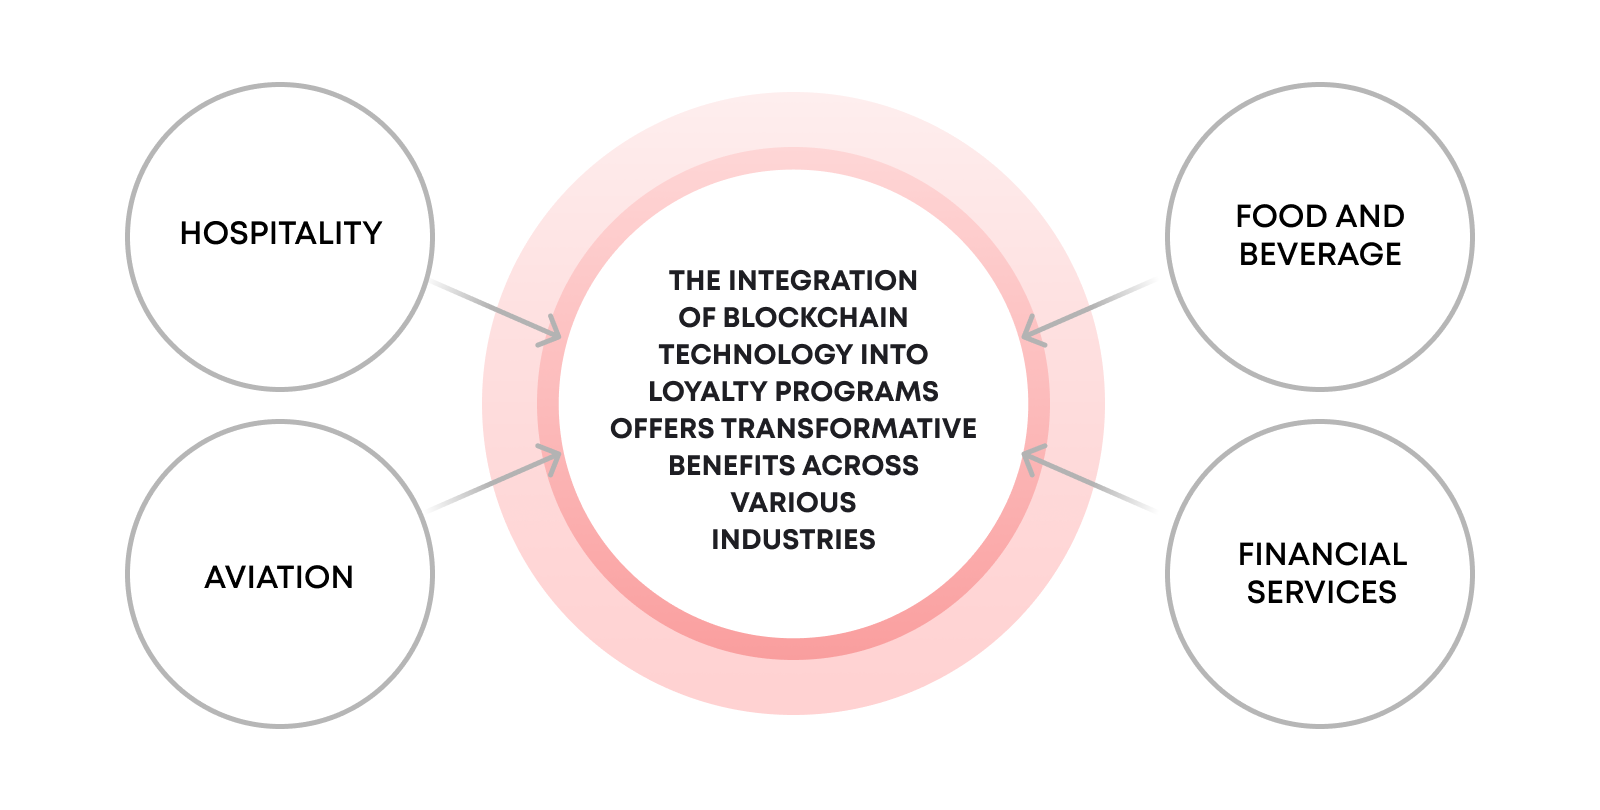 The integration of blockchain technology into loyalty programs offers transformative benefits across various industries